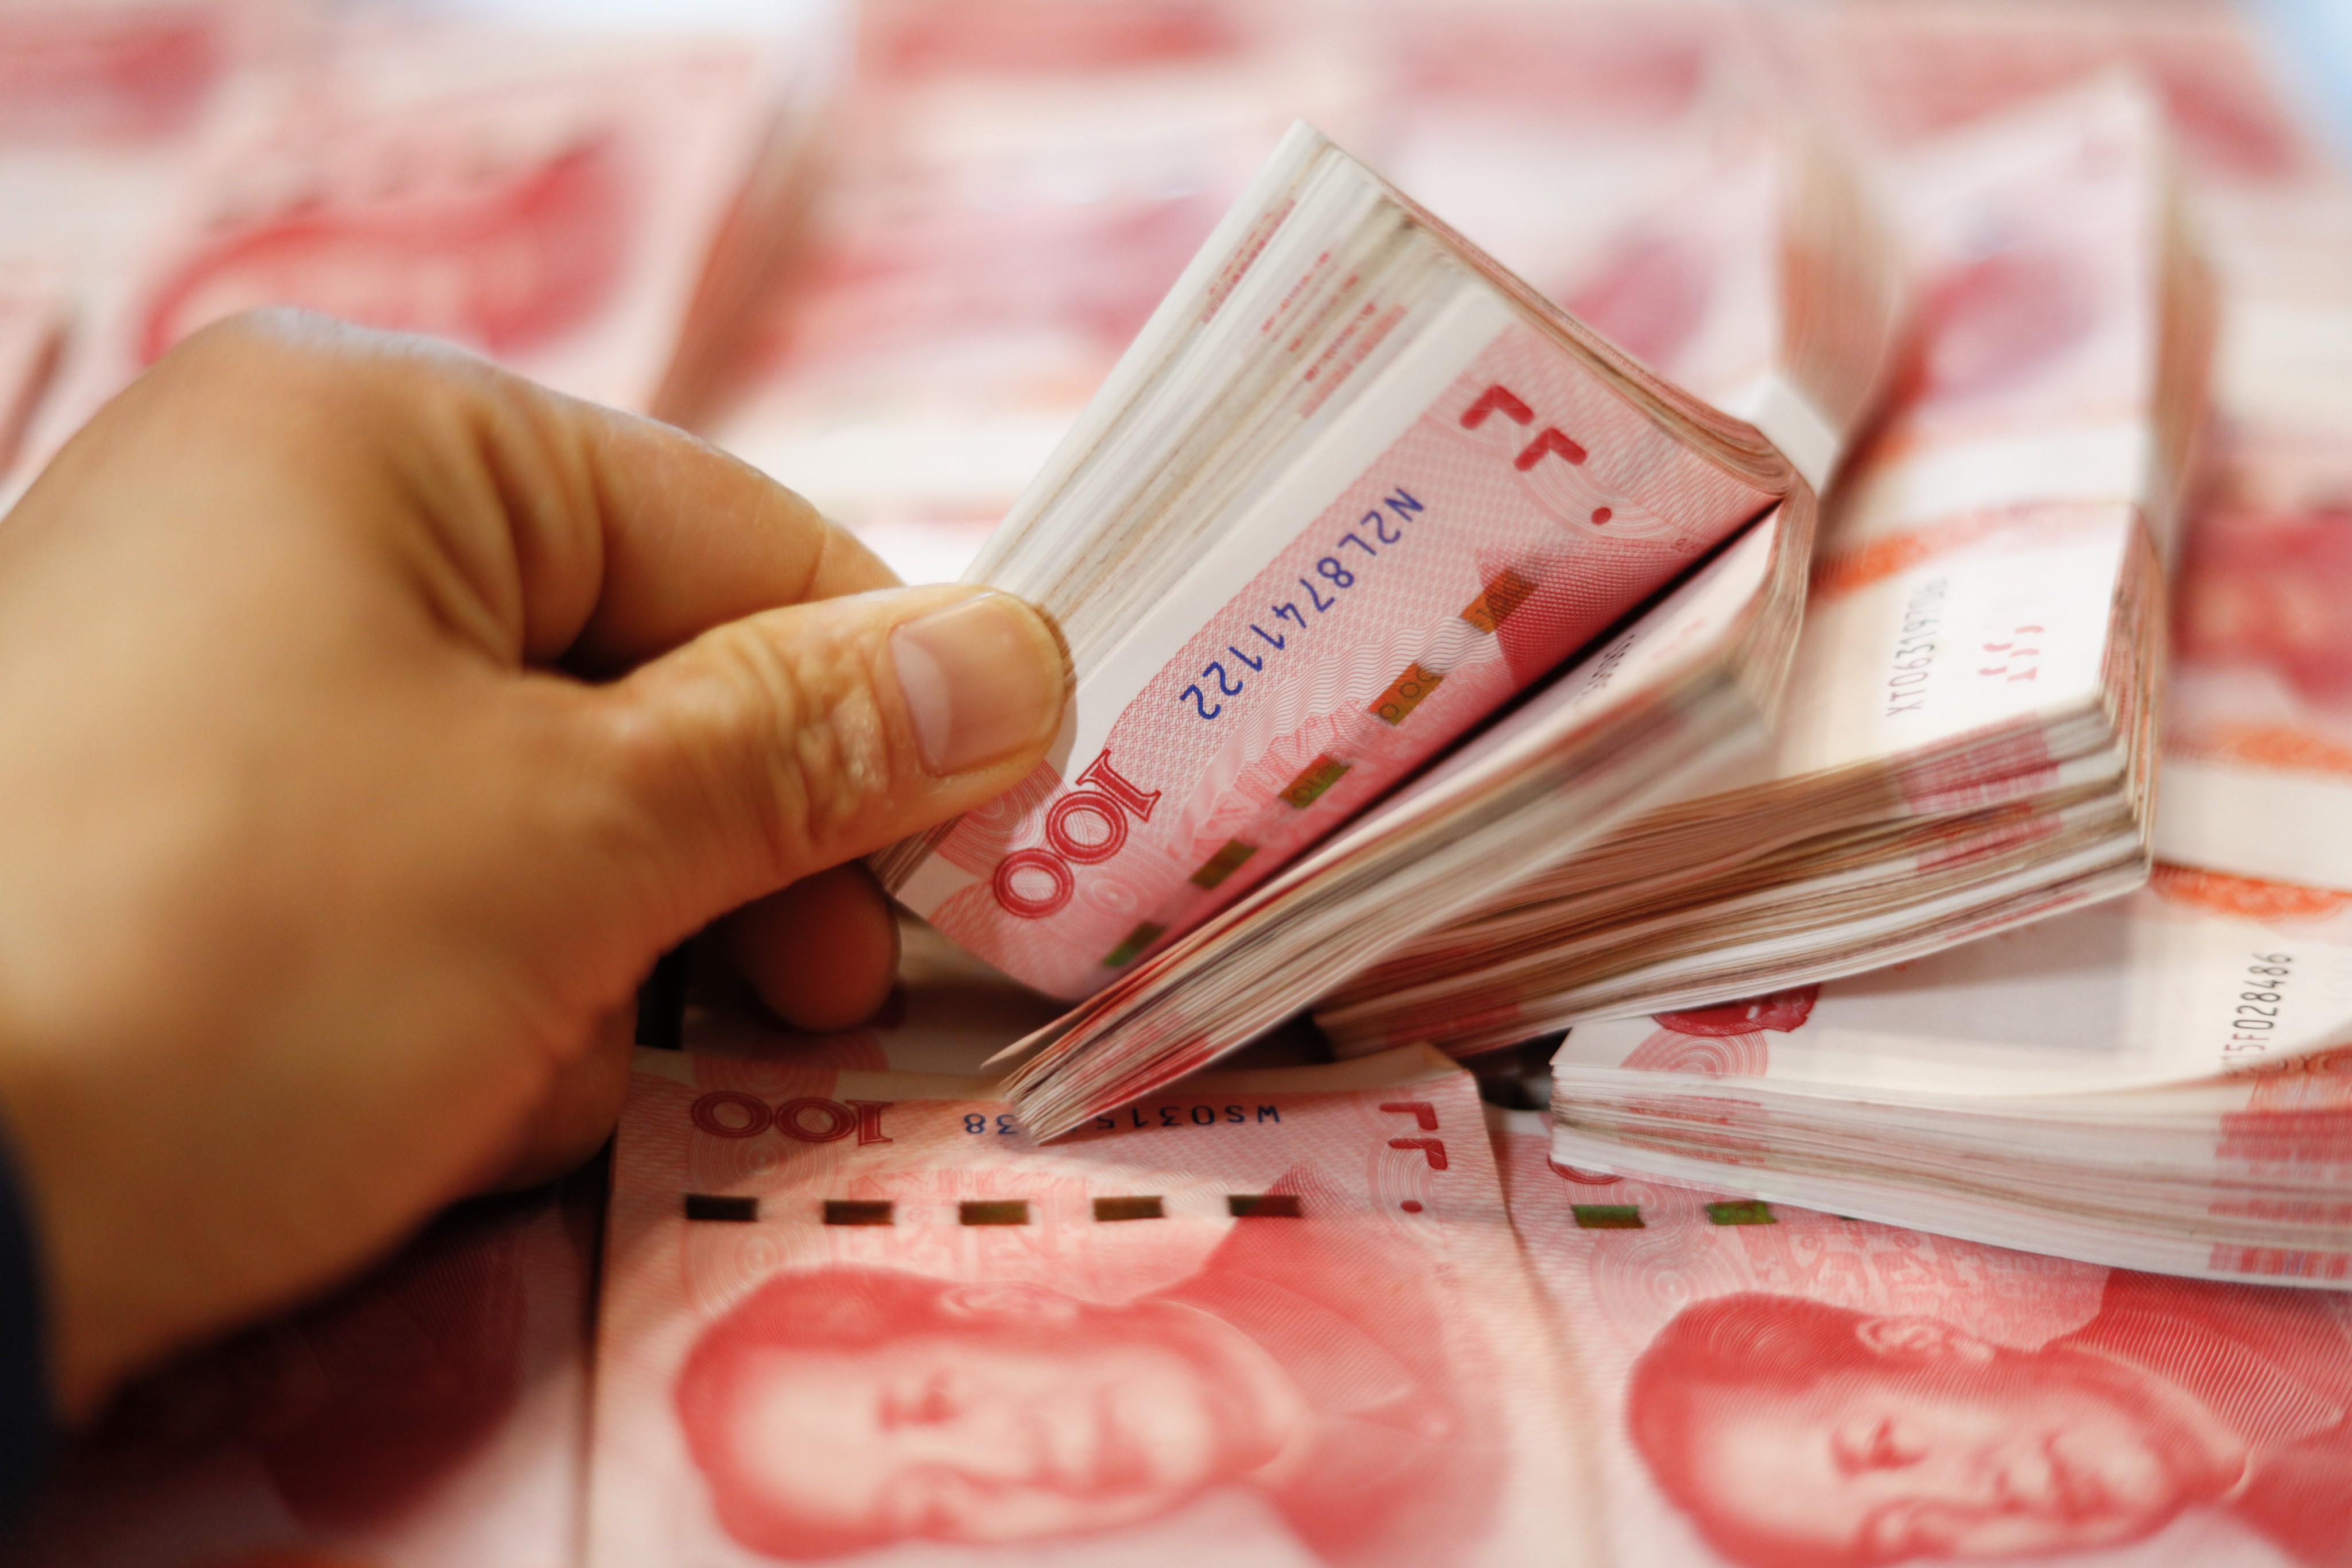 PBOC governor Yi Gang would like to see greater market-driven force and more flexibility in the yuan’s exchange rate regime. Photo: Shutterstock